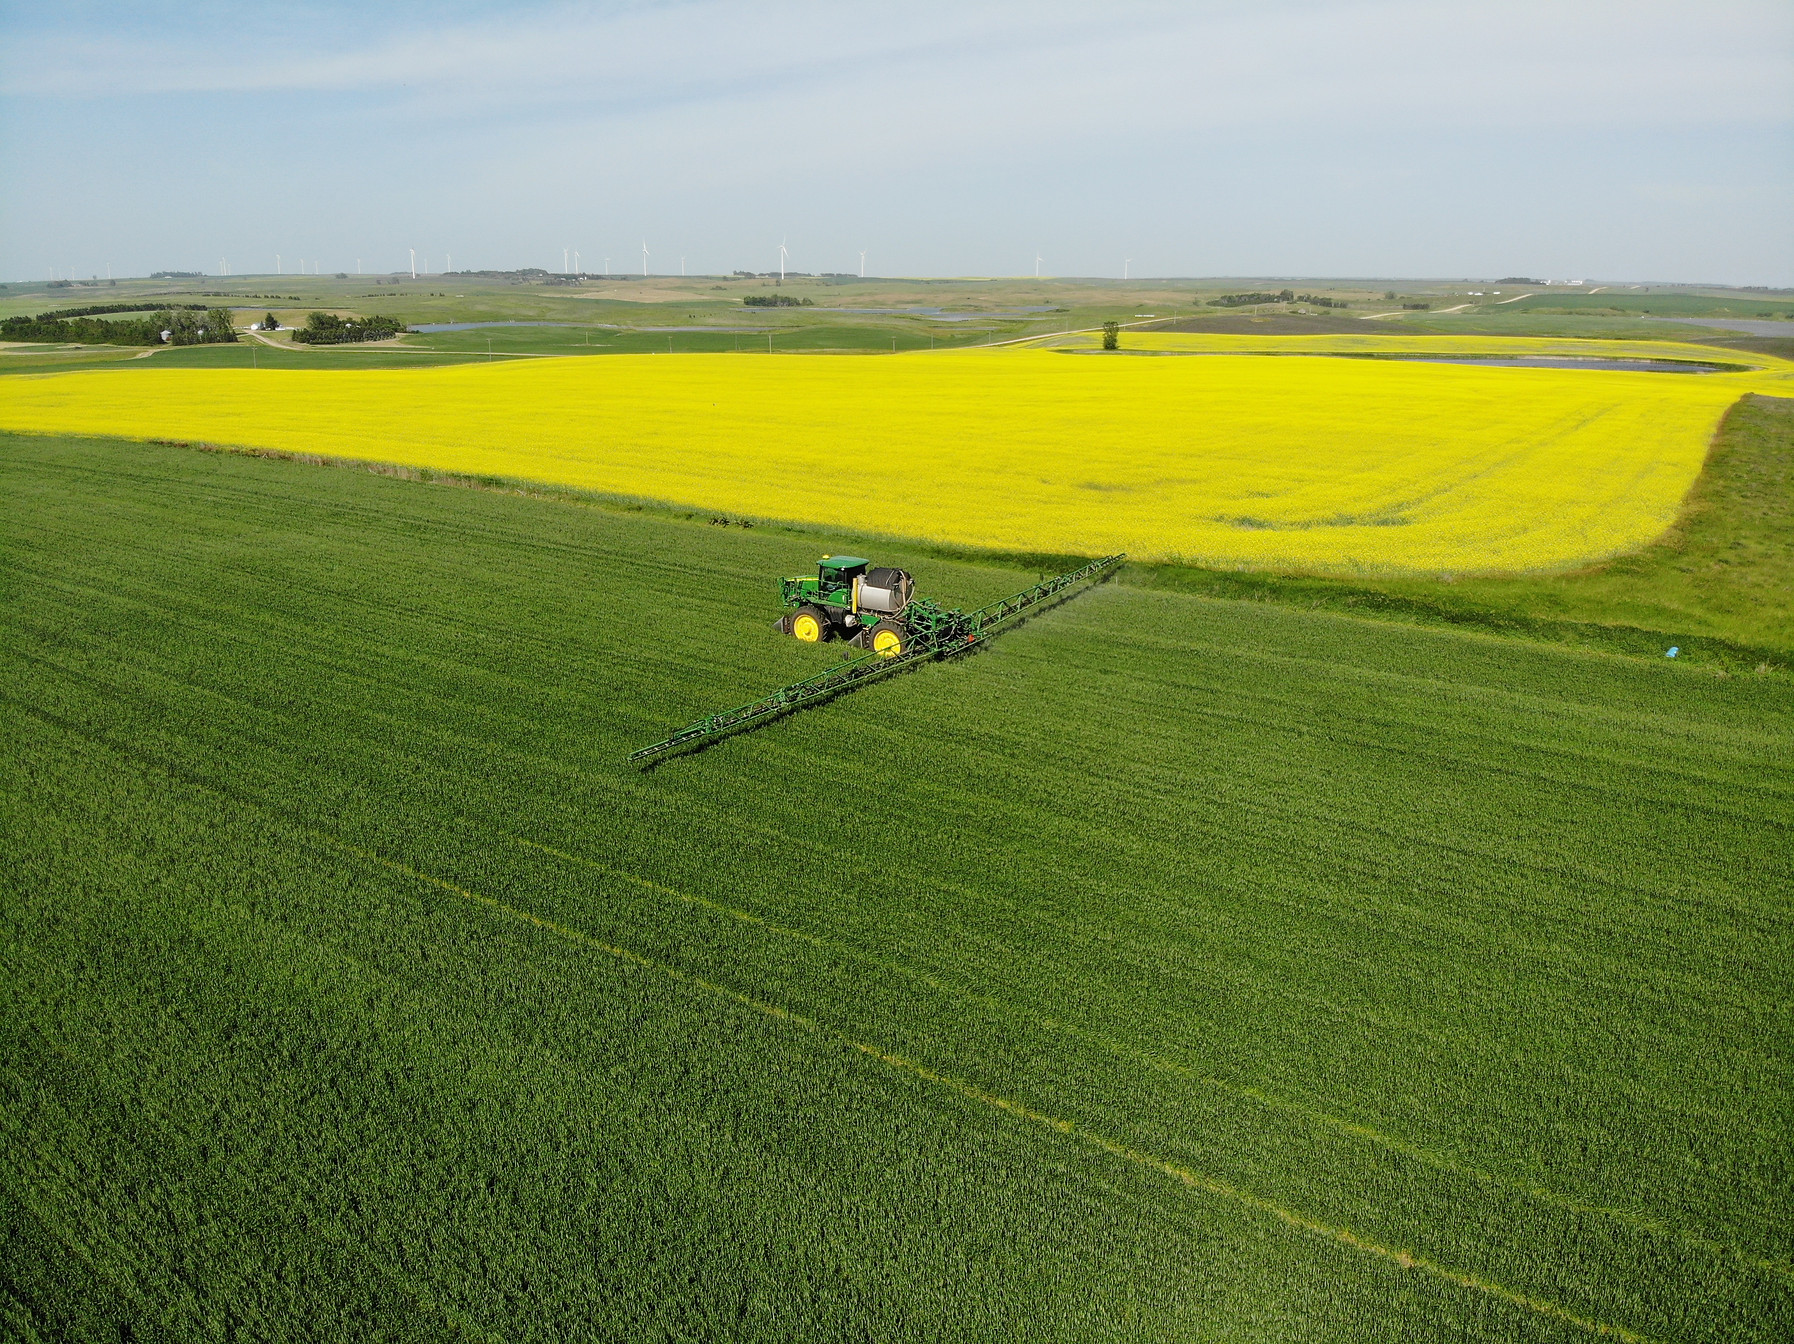 A large combine type tractor spraying a field